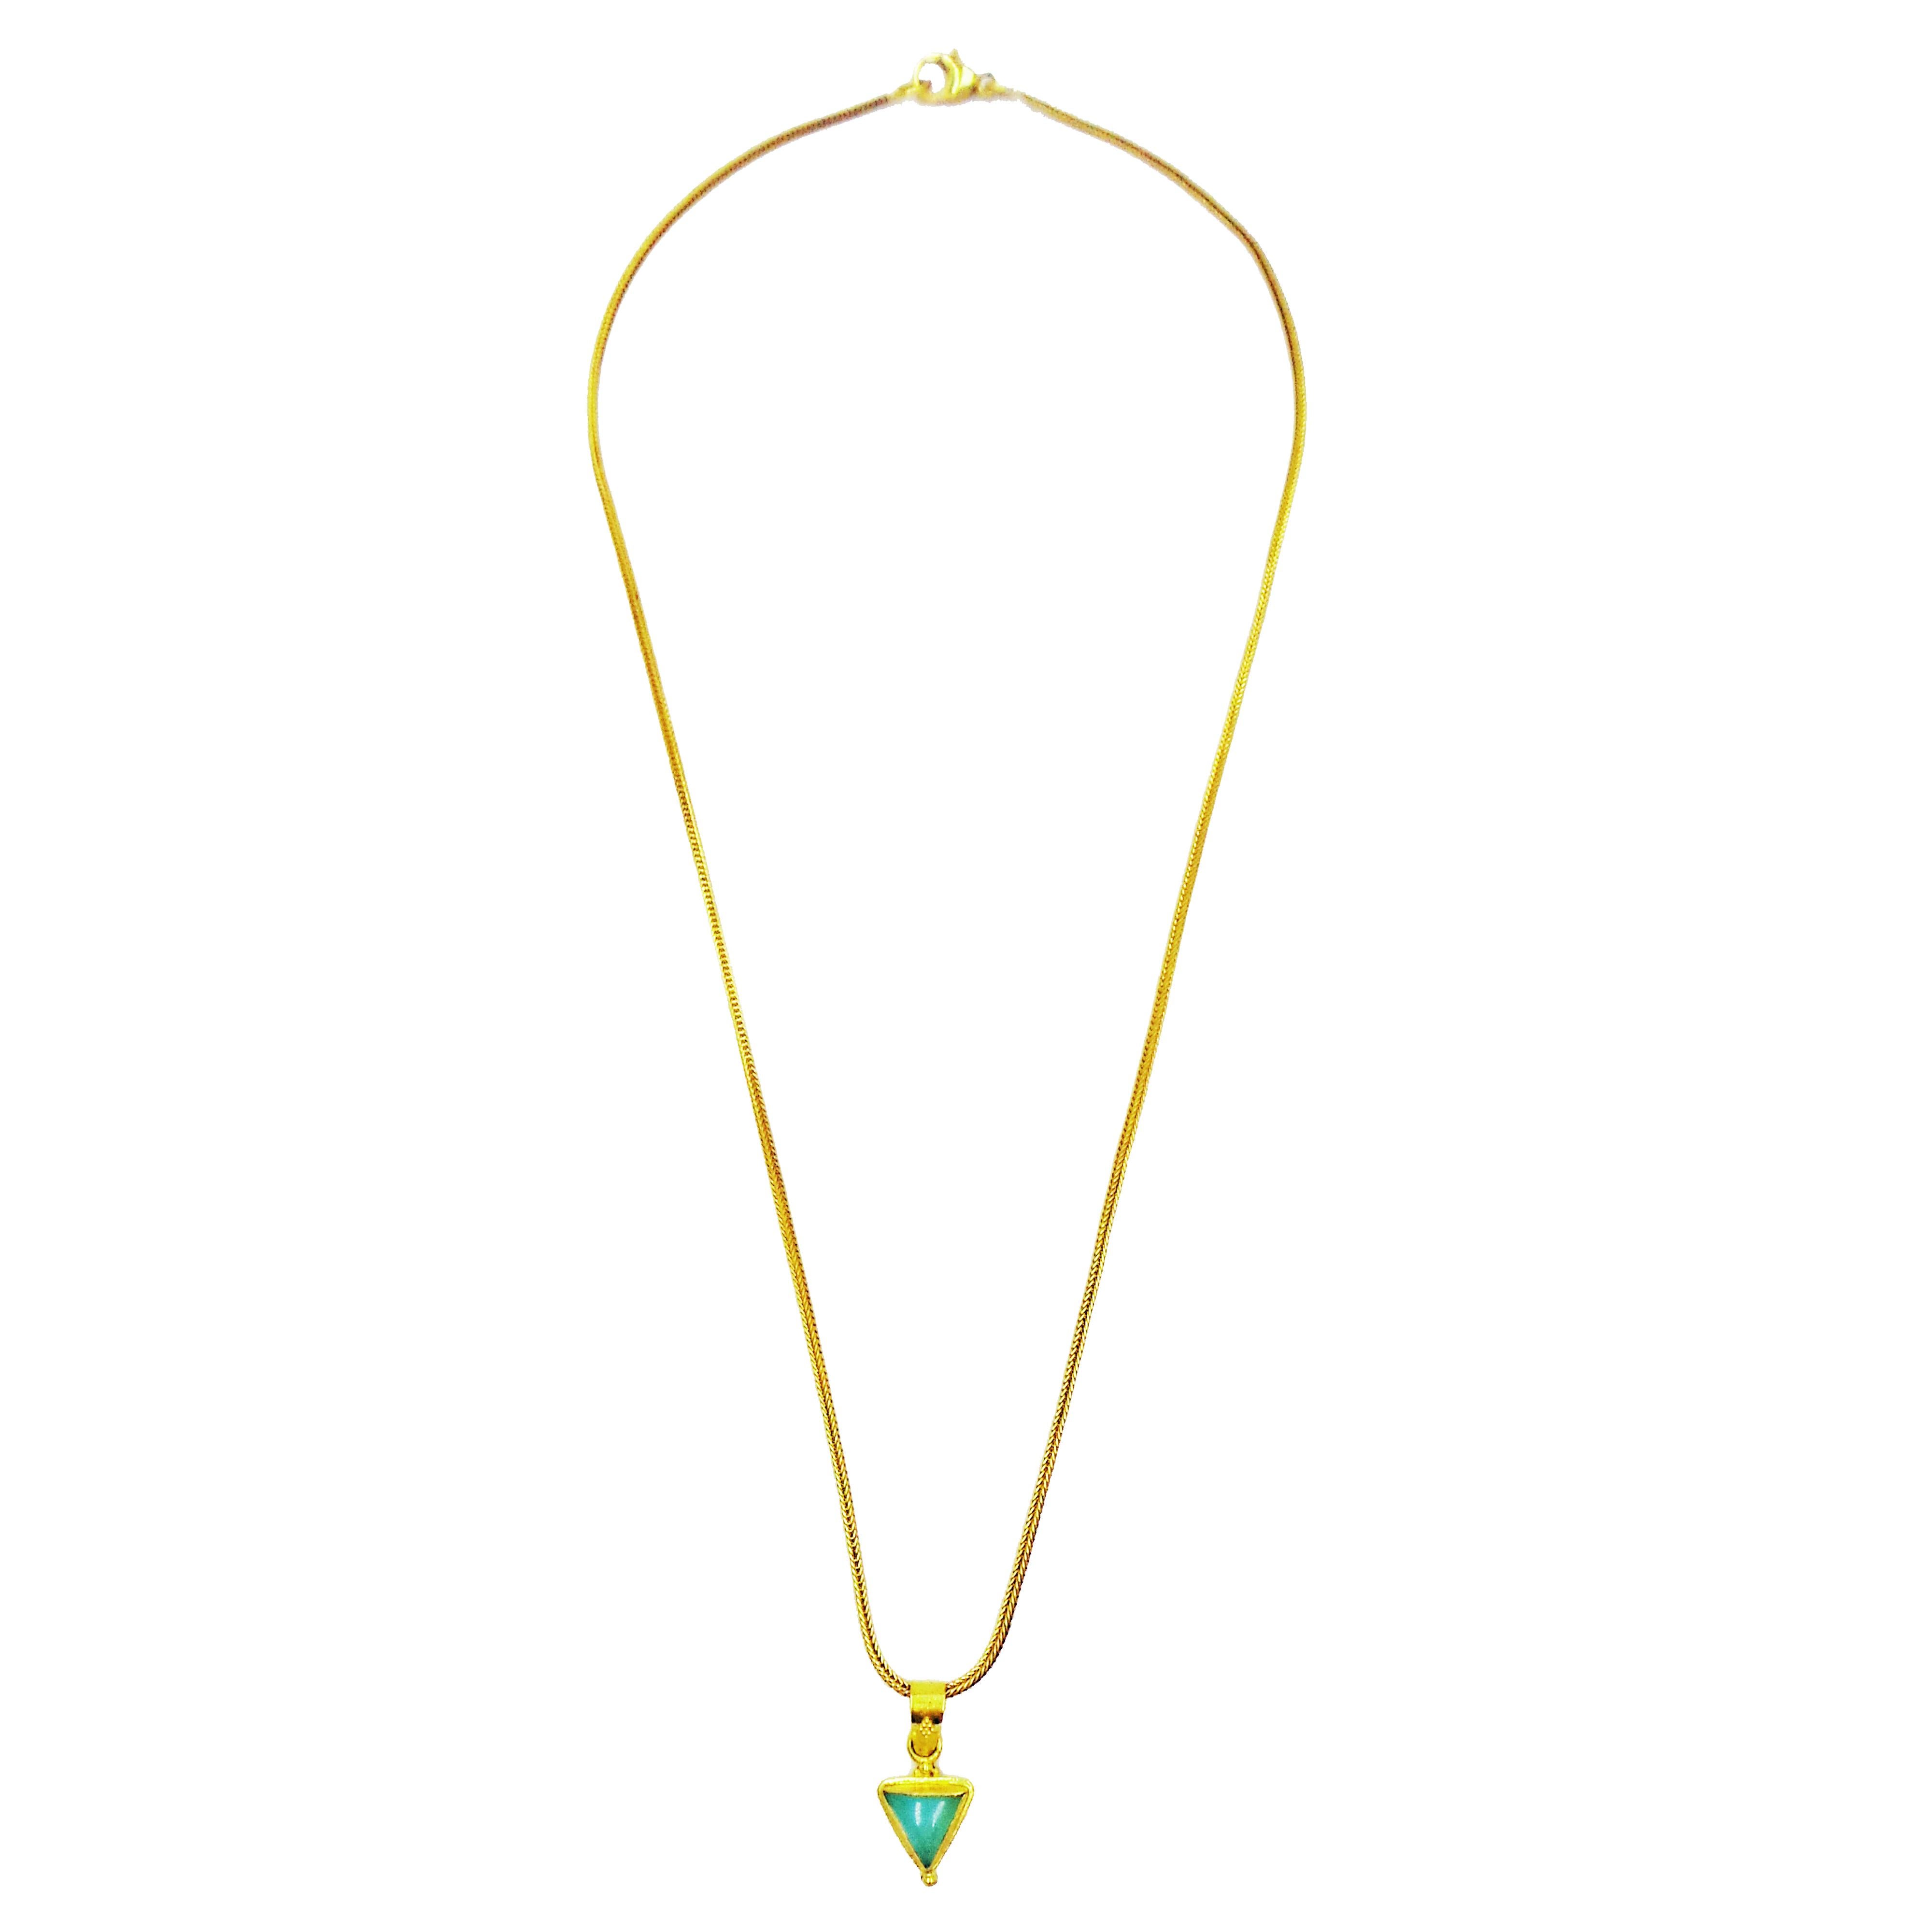 Petite Peruvian Blue Opal and 22k yellow gold pendant necklace and dangle hoop earring set. Necklace pendant is 22k yellow gold with granulation accents and triangle shaped greenish-blue Opal on a 18k gold foxtail chain with lobster clasp. Pendant